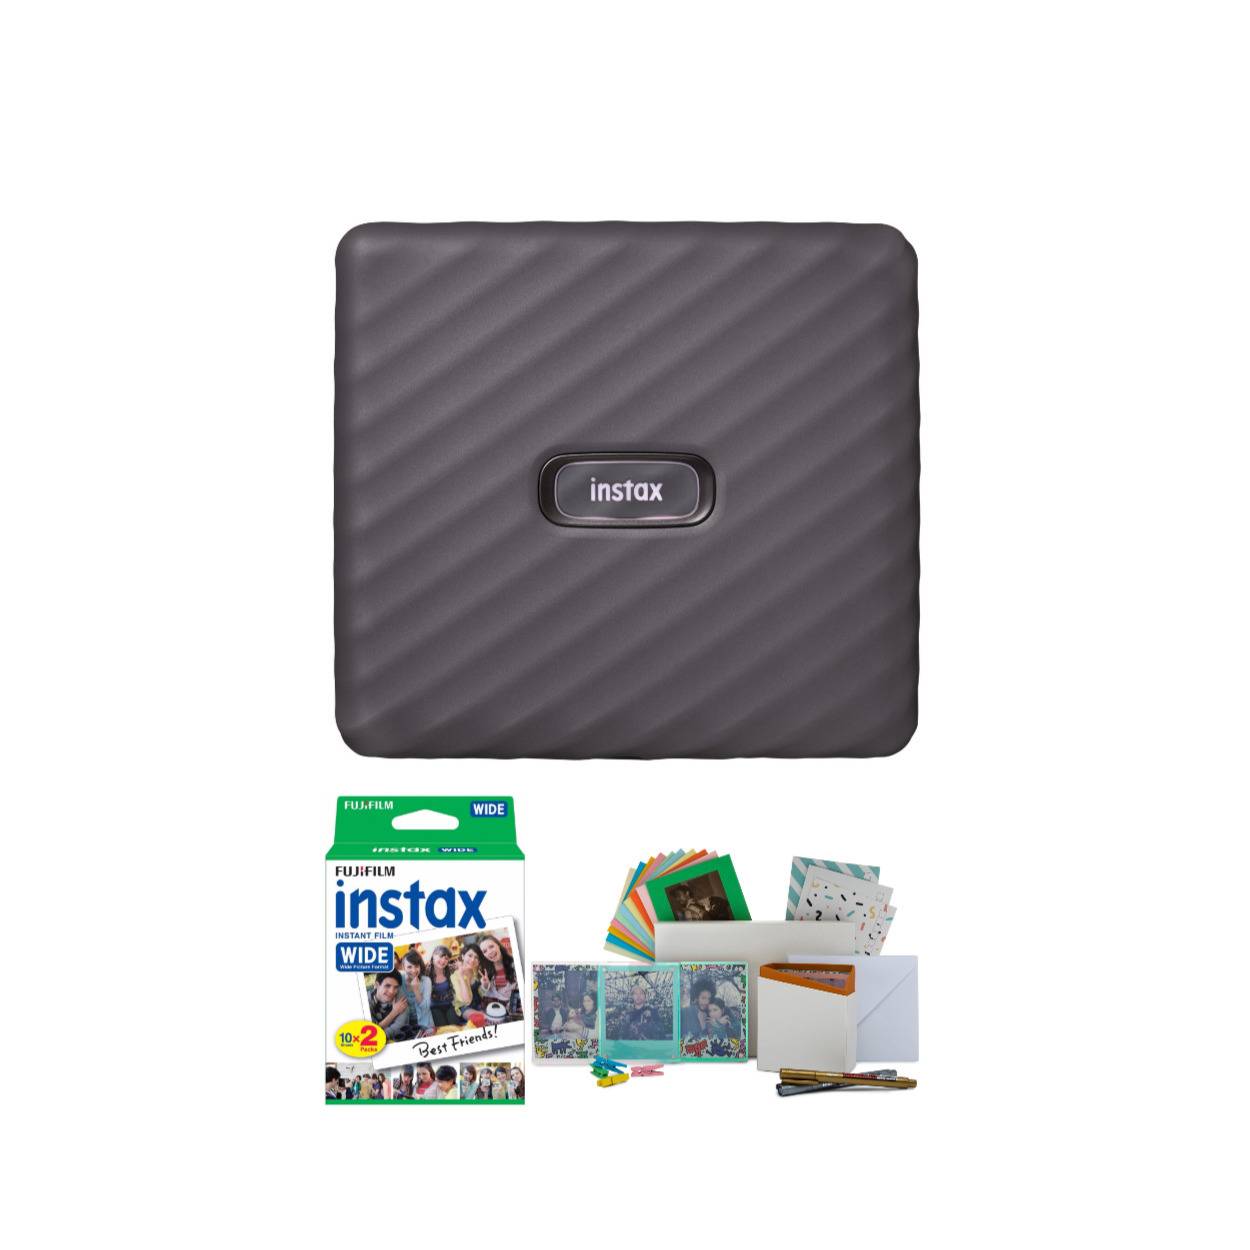 Fujifilm Instax Link Wide Instant Smartphone Photo Printer (Mocha ) Everything Kit with Film